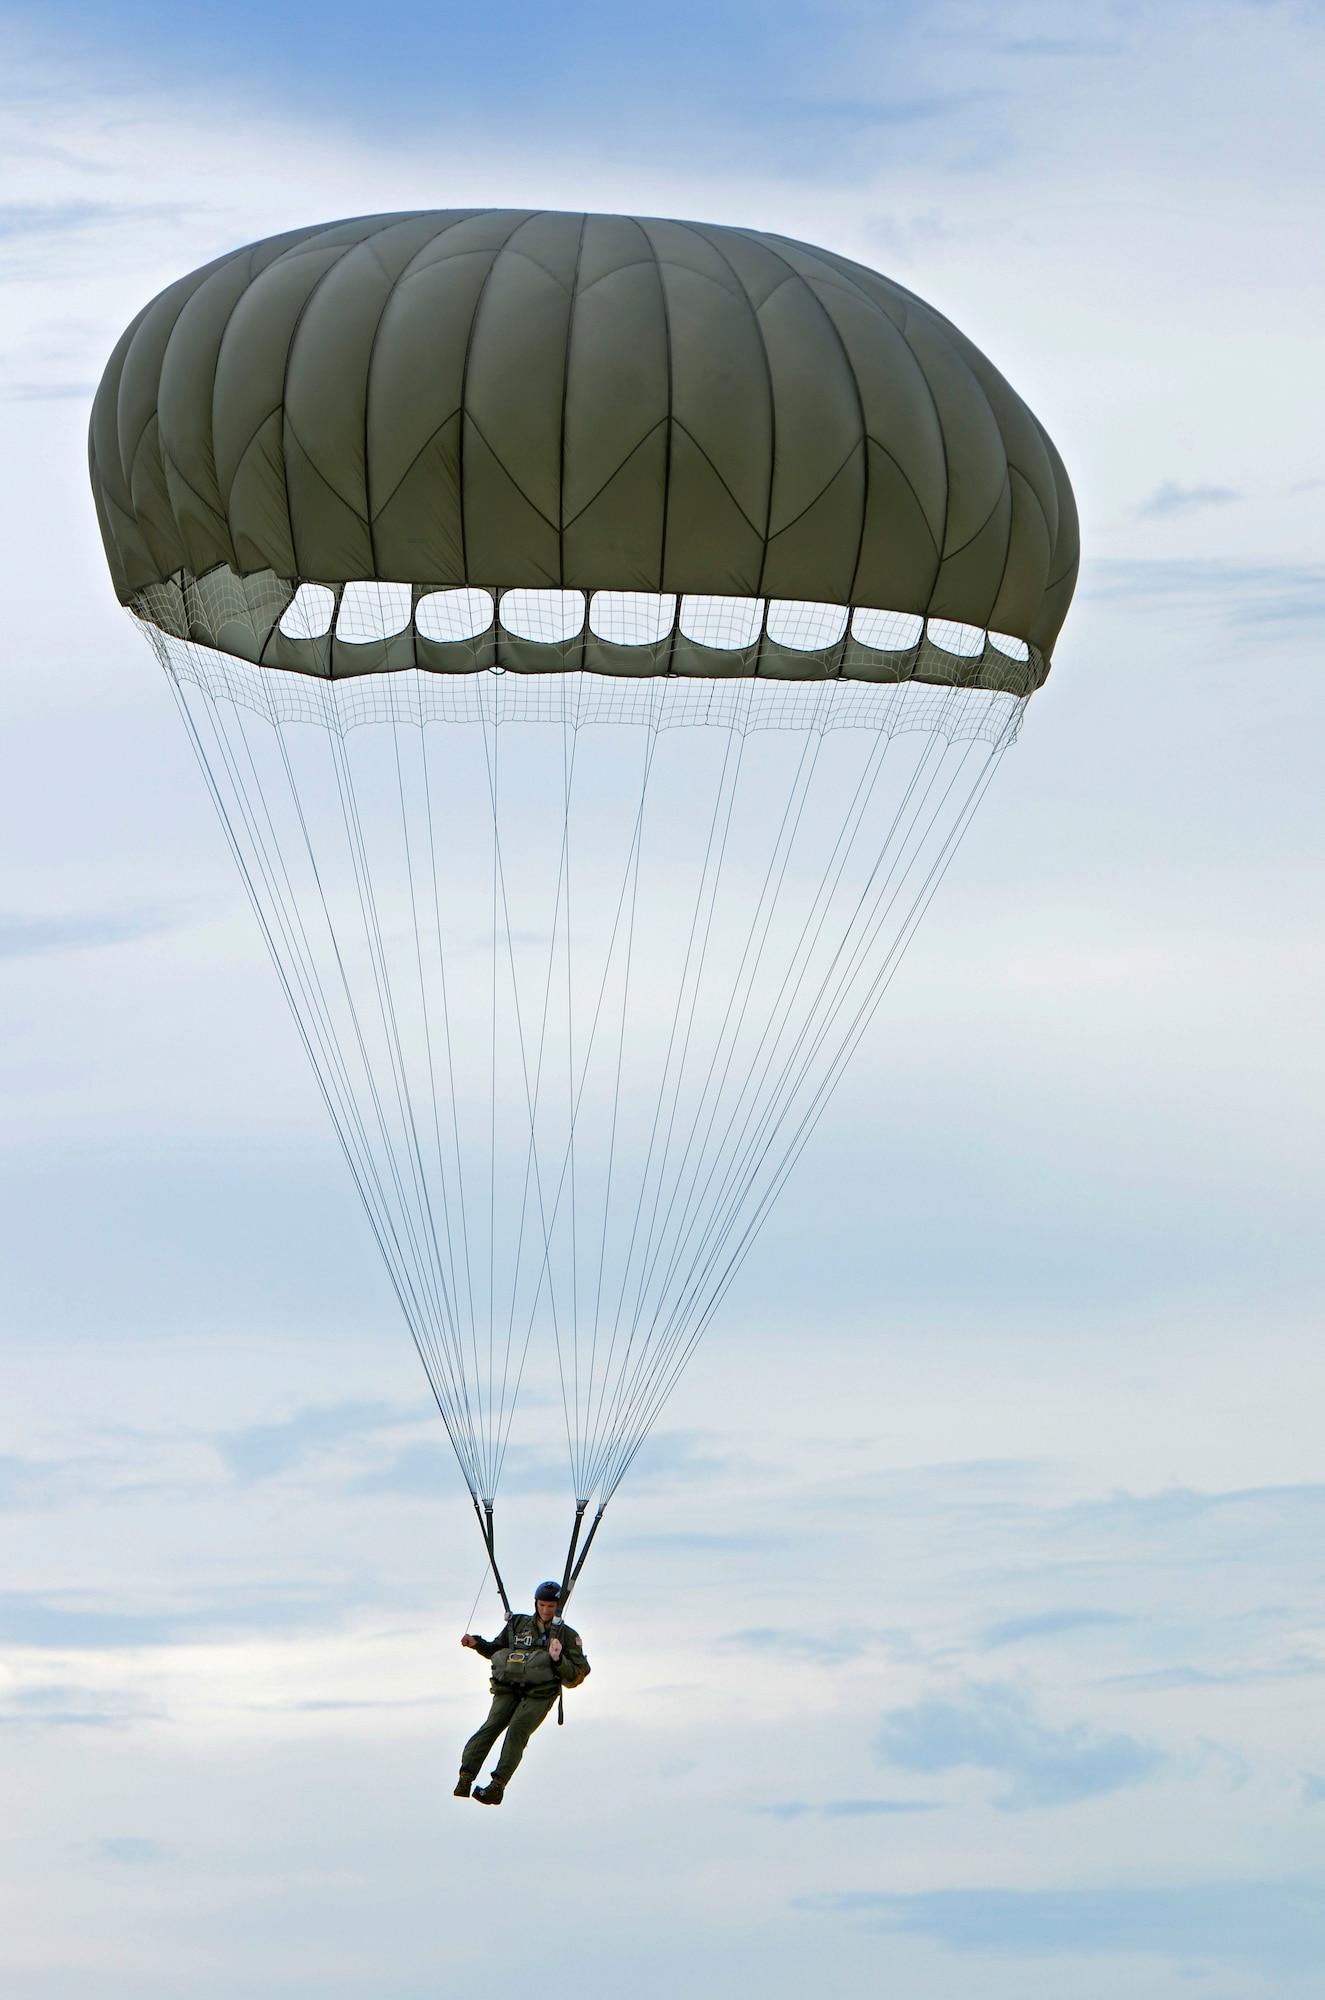 Staff Sgt. Daniel Guy, 736th Security Forces Squadron fire team leader, makes his way to the ground Aug. 21 after jumping from a C-130 Hercules over Andersen Air Force Base, Guam. Air Force static line capability falls under the personnel parachute program. Jumpers are first qualified during a three-week long basic airborne course at Ft. Benning, Ga., and then continue to work on their jumping proficiency and qualifications after they return here. (U.S. Air Force photo by Airman 1st Class Marianique Santos/Released)